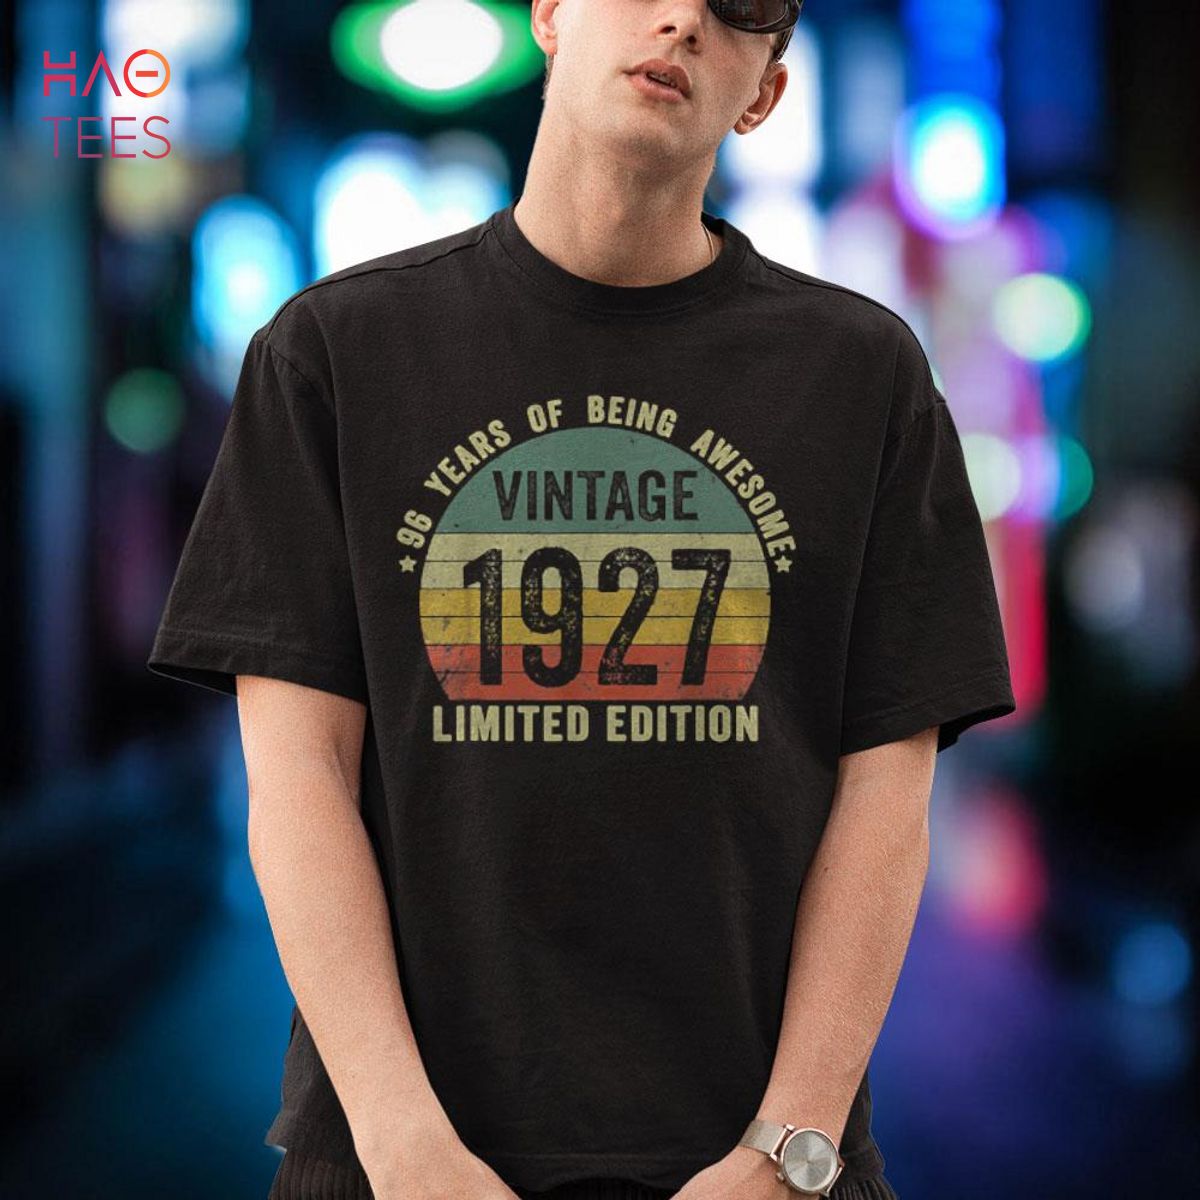 96th Birthday 96 Year Old Vintage 1927 Limited Edition Shirt